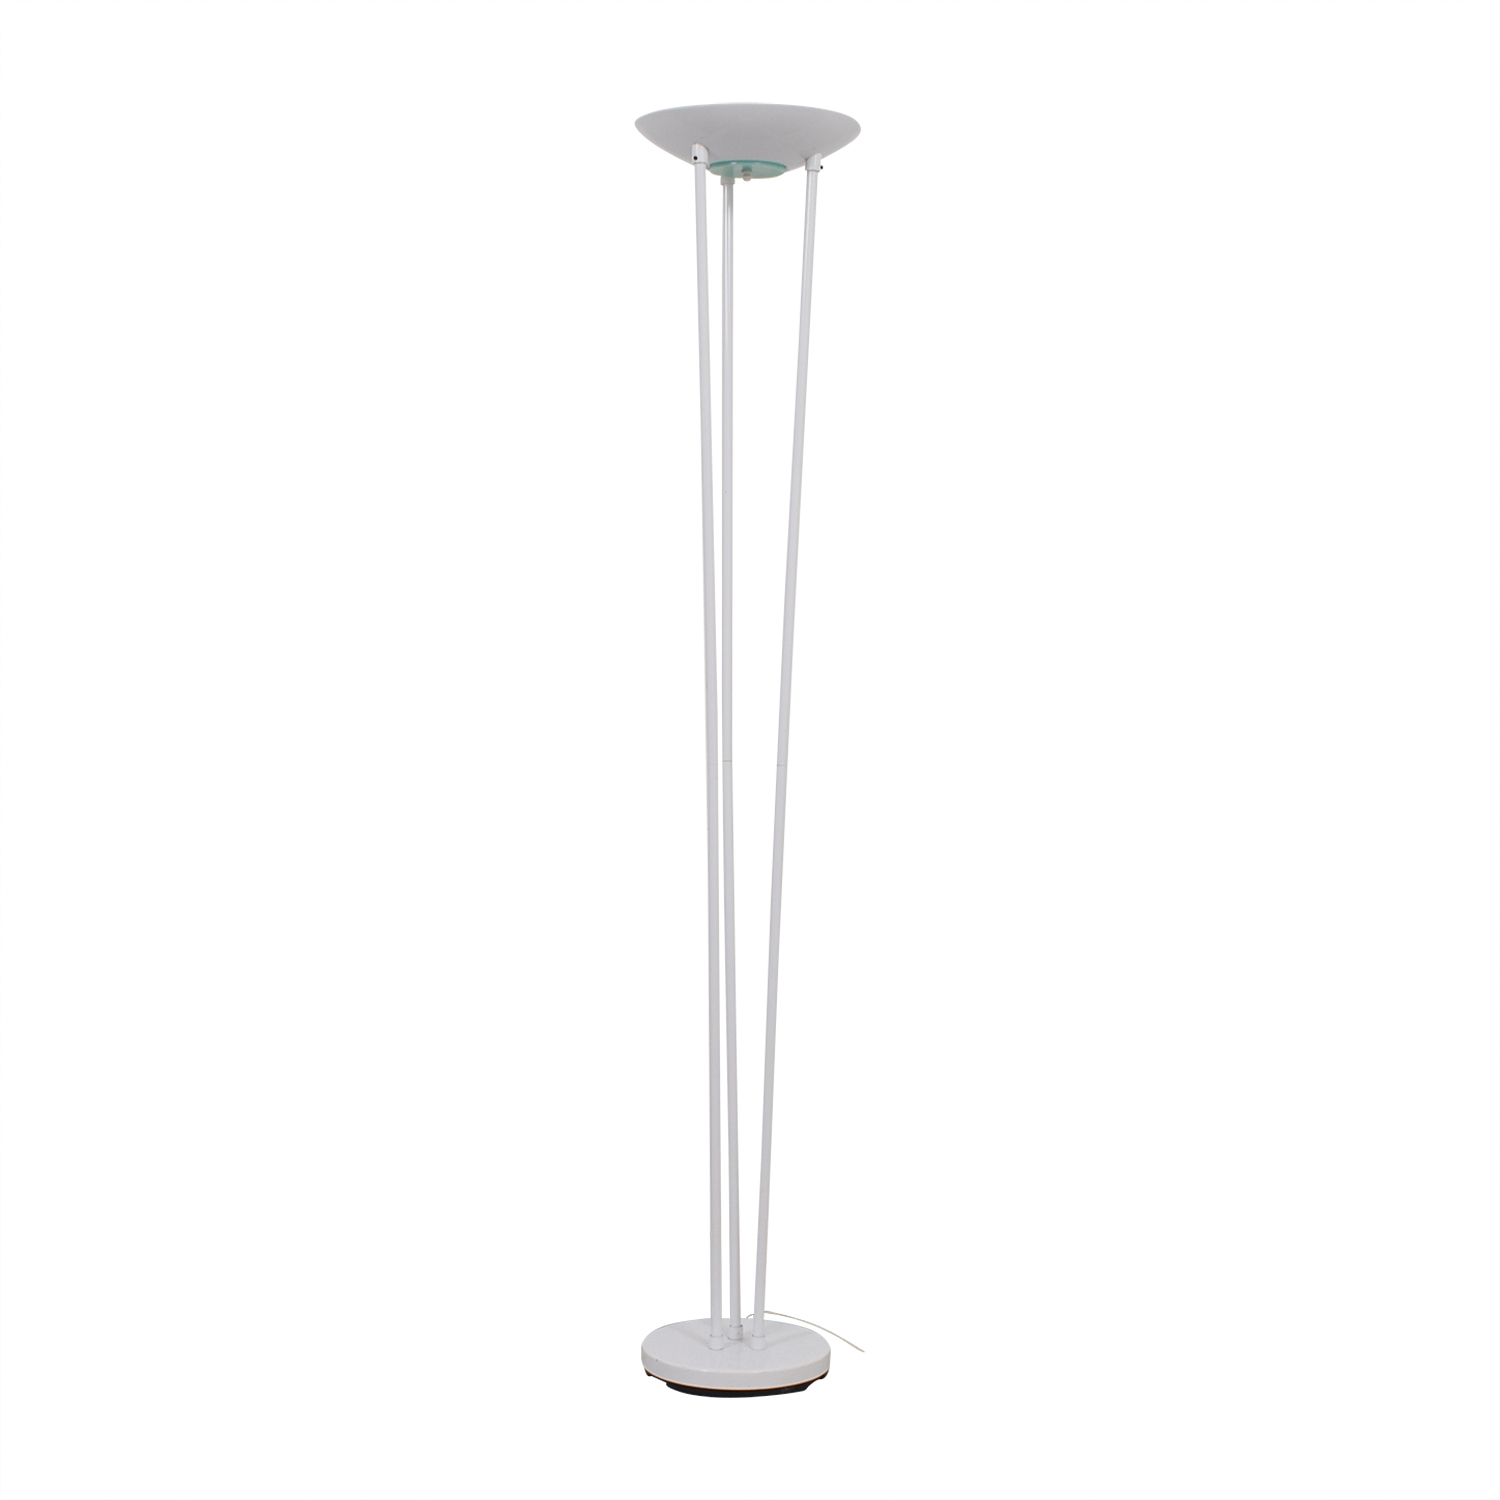 87 Off Torchiere Classic White Halogen Floor Lamp Decor pertaining to sizing 1500 X 1500